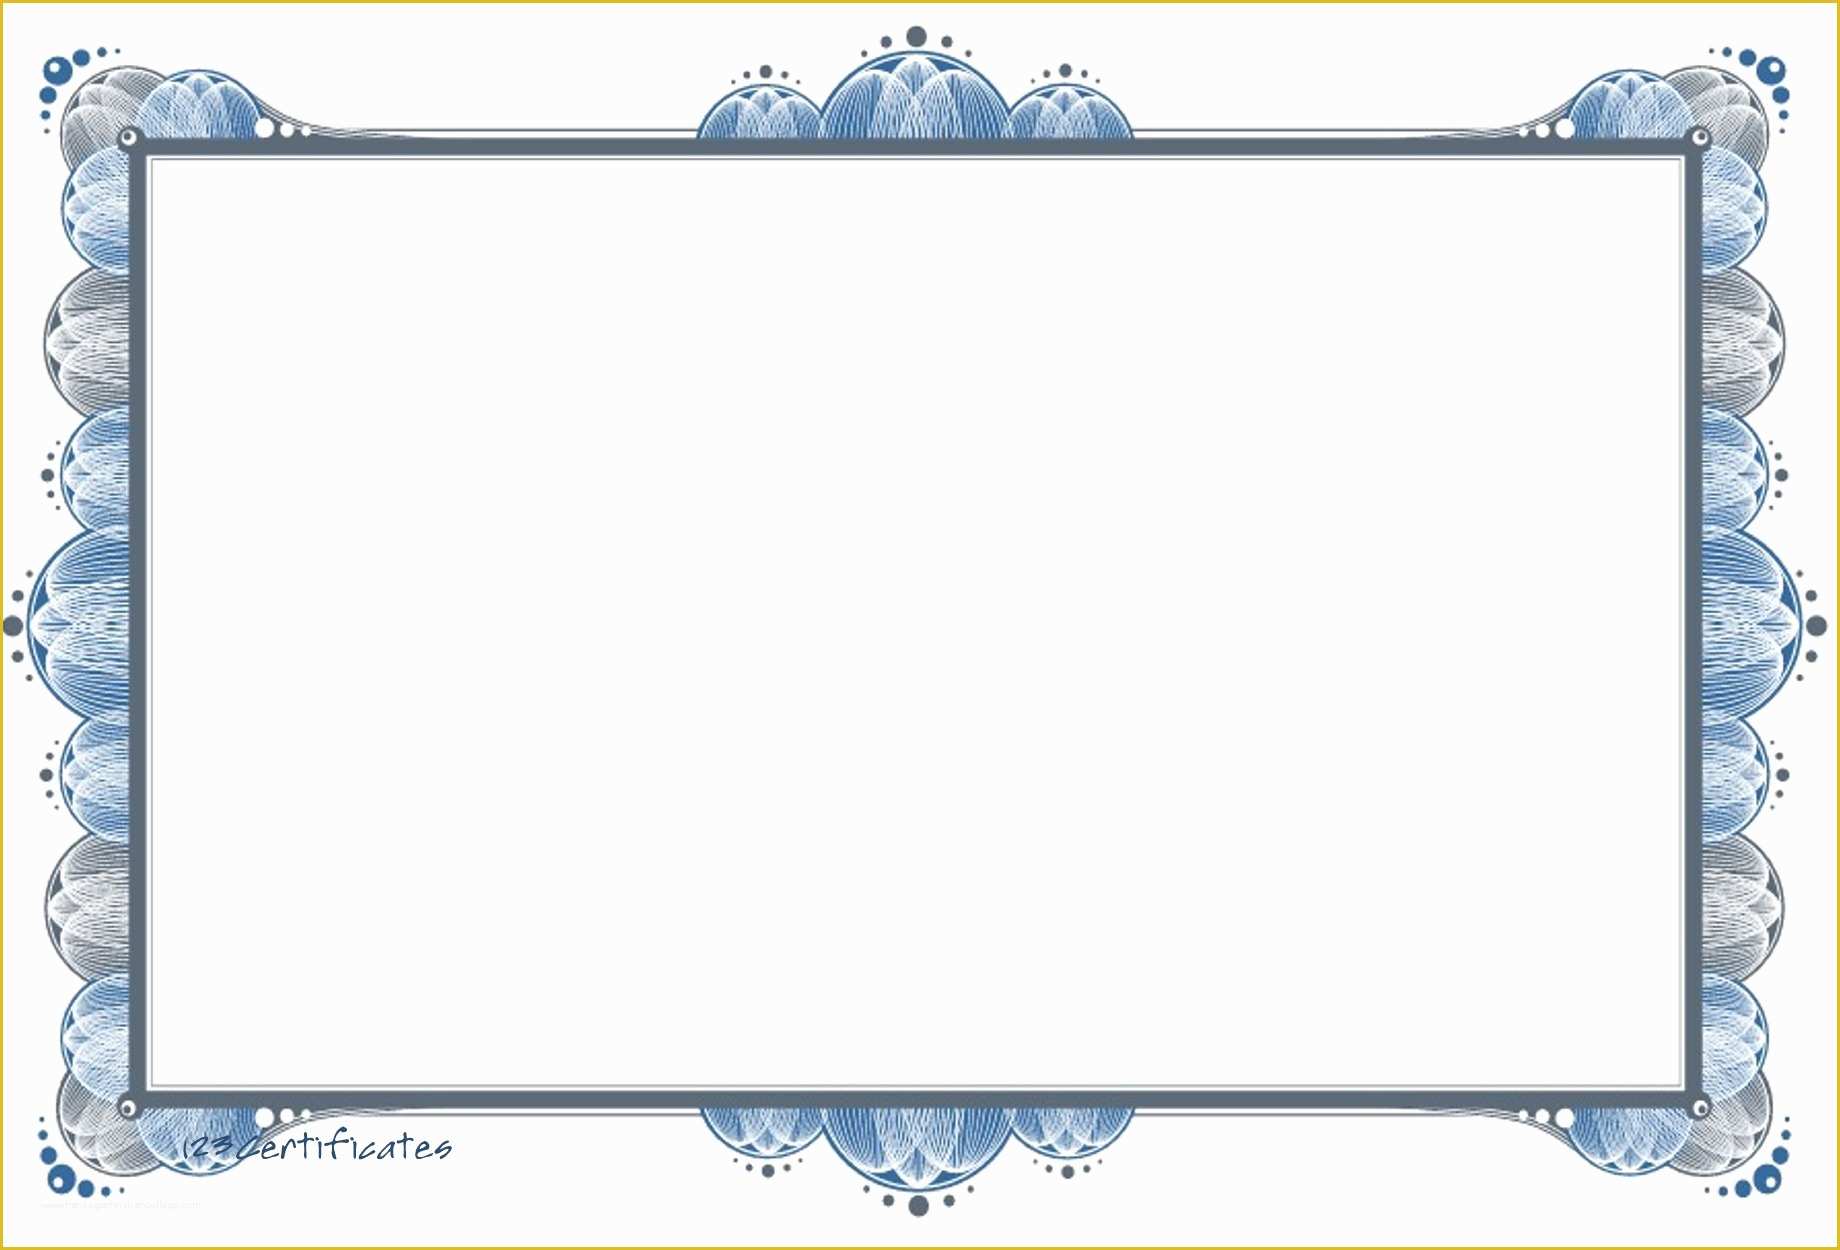 Diploma Certificate Template Free Download Of Free Certificate Borders to